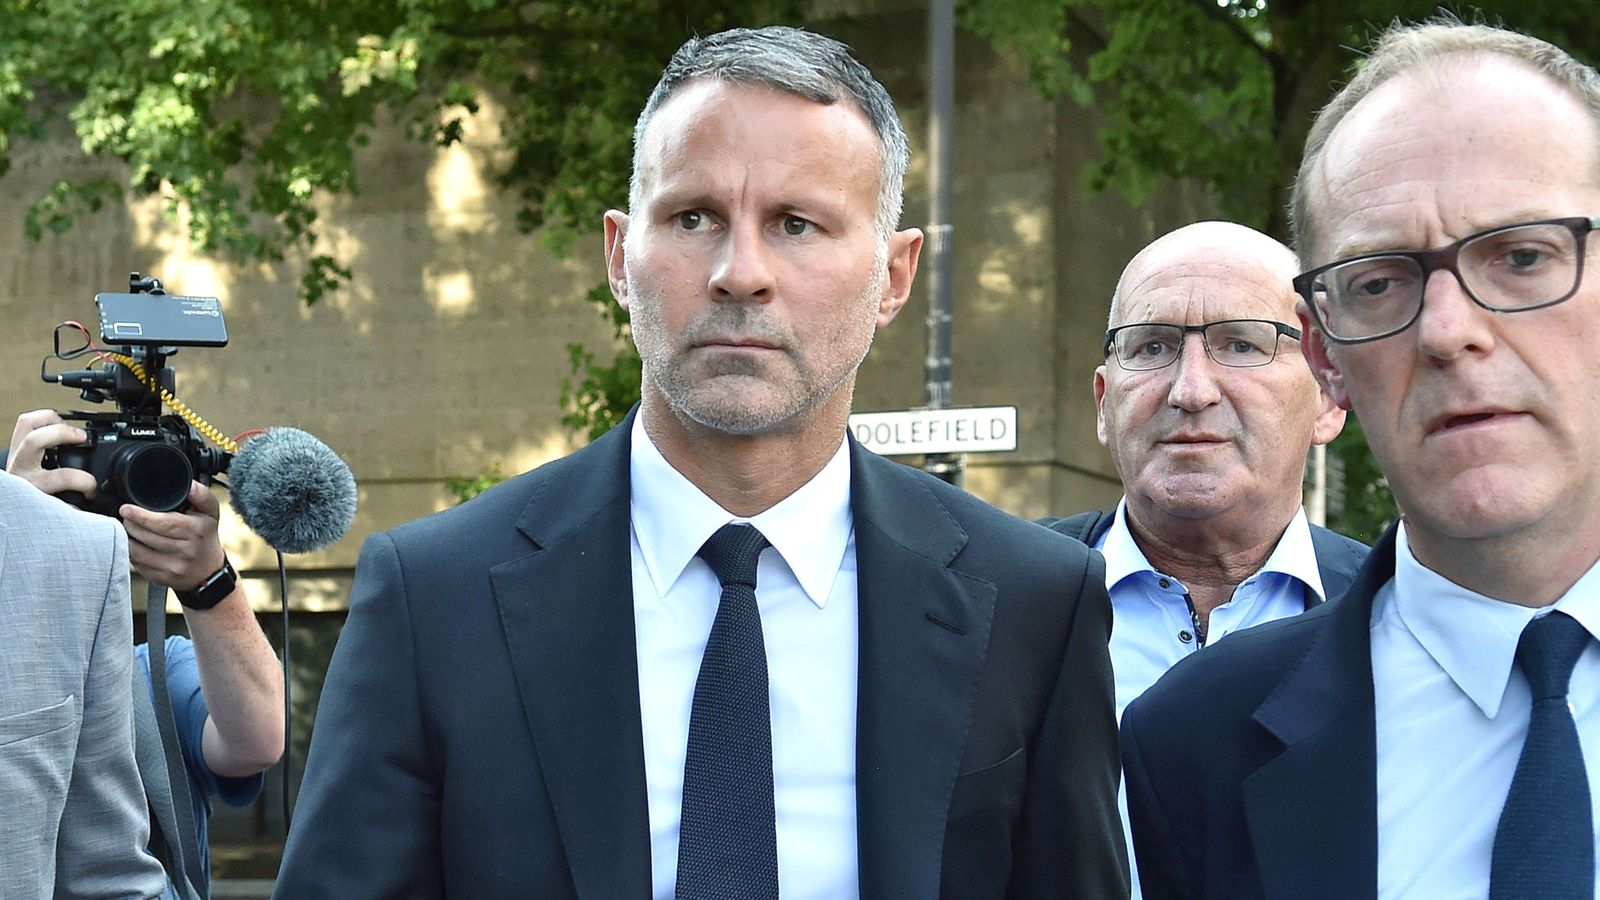 ‘I’ve never assaulted my ex-girlfriend’ – Giggs denies attacking ex-lover